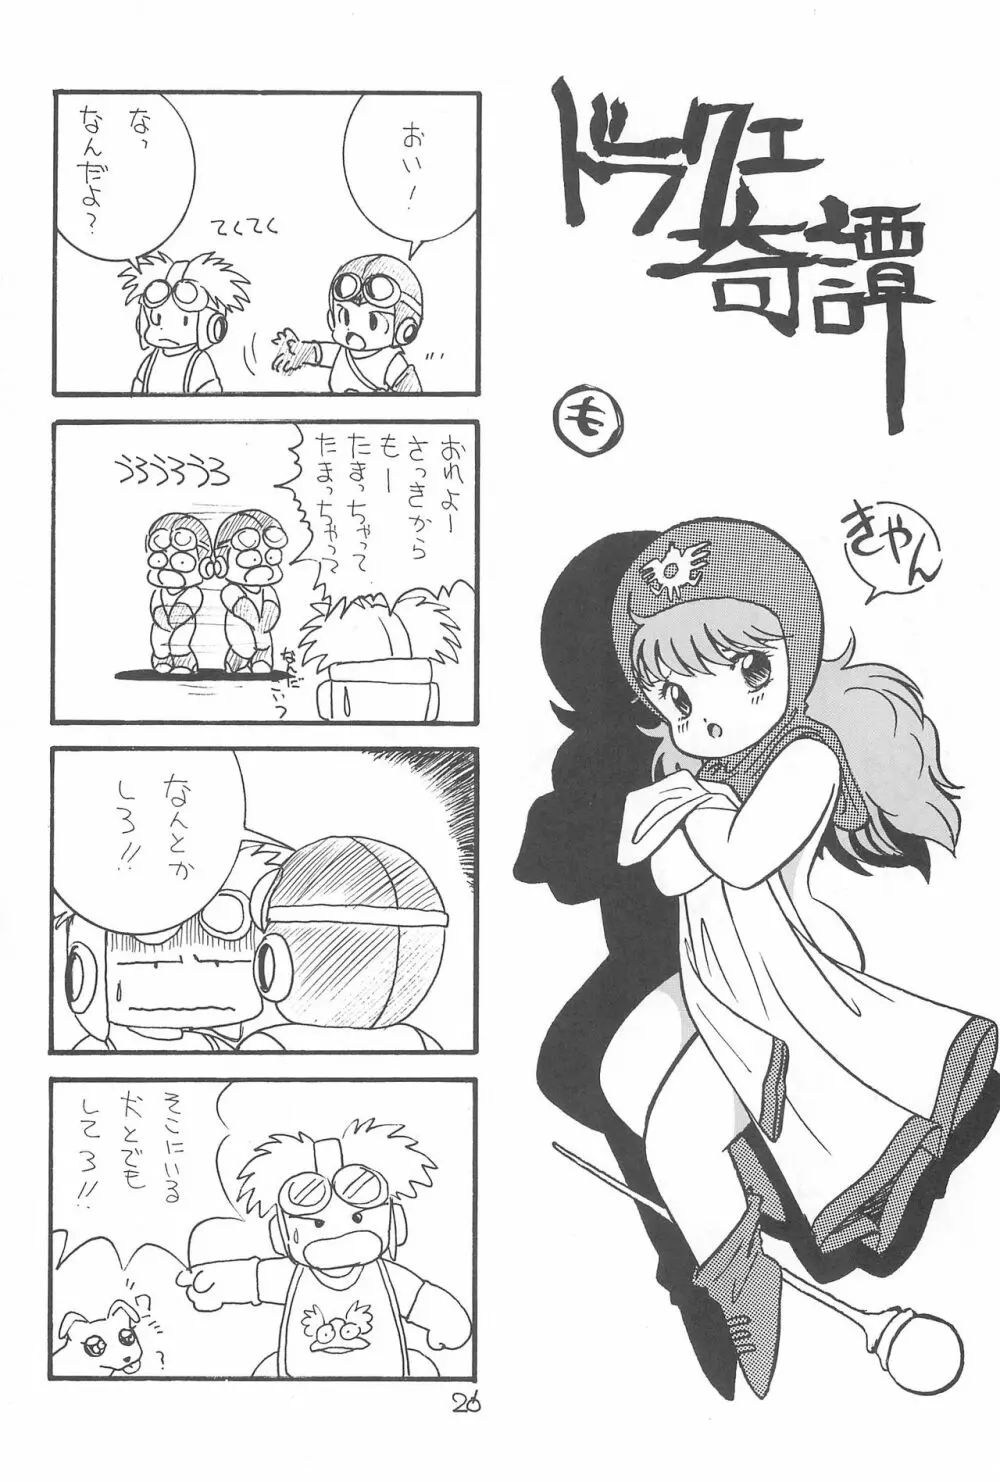 LITTLE GIRLS OF THE GAME CHARACTERS 2+ - page27